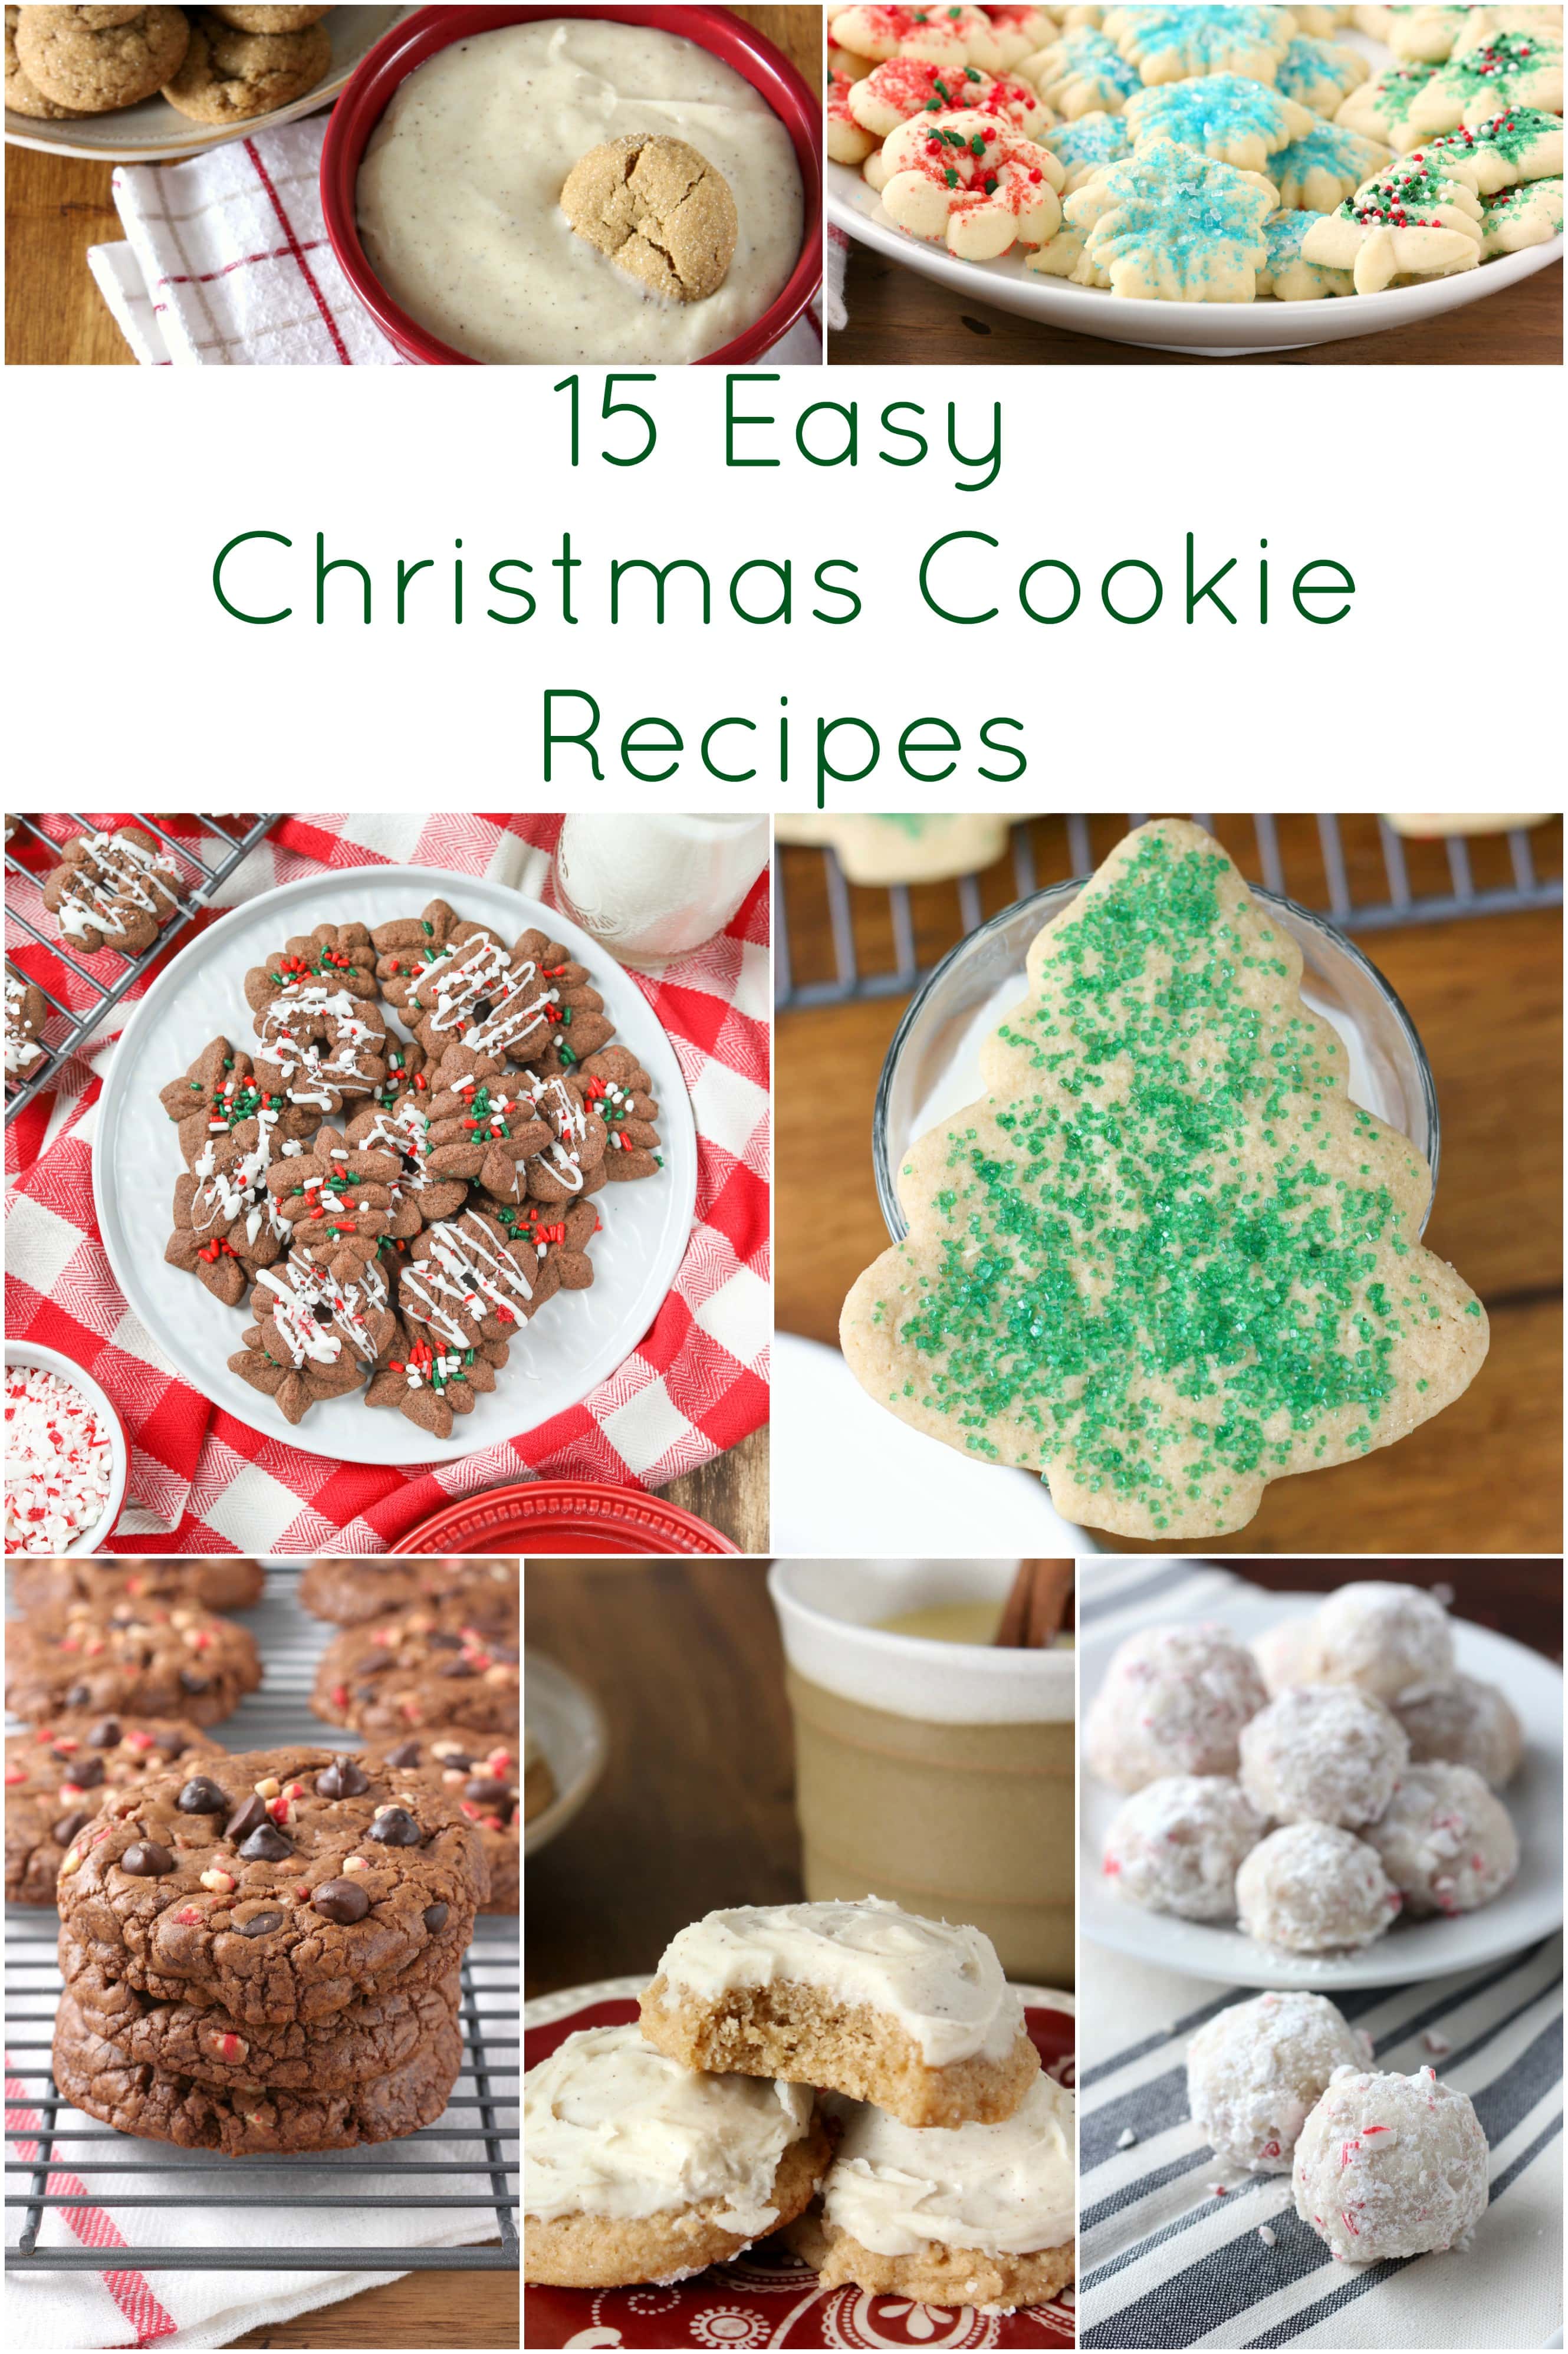 15 Easy Christmas Cookie Recipes